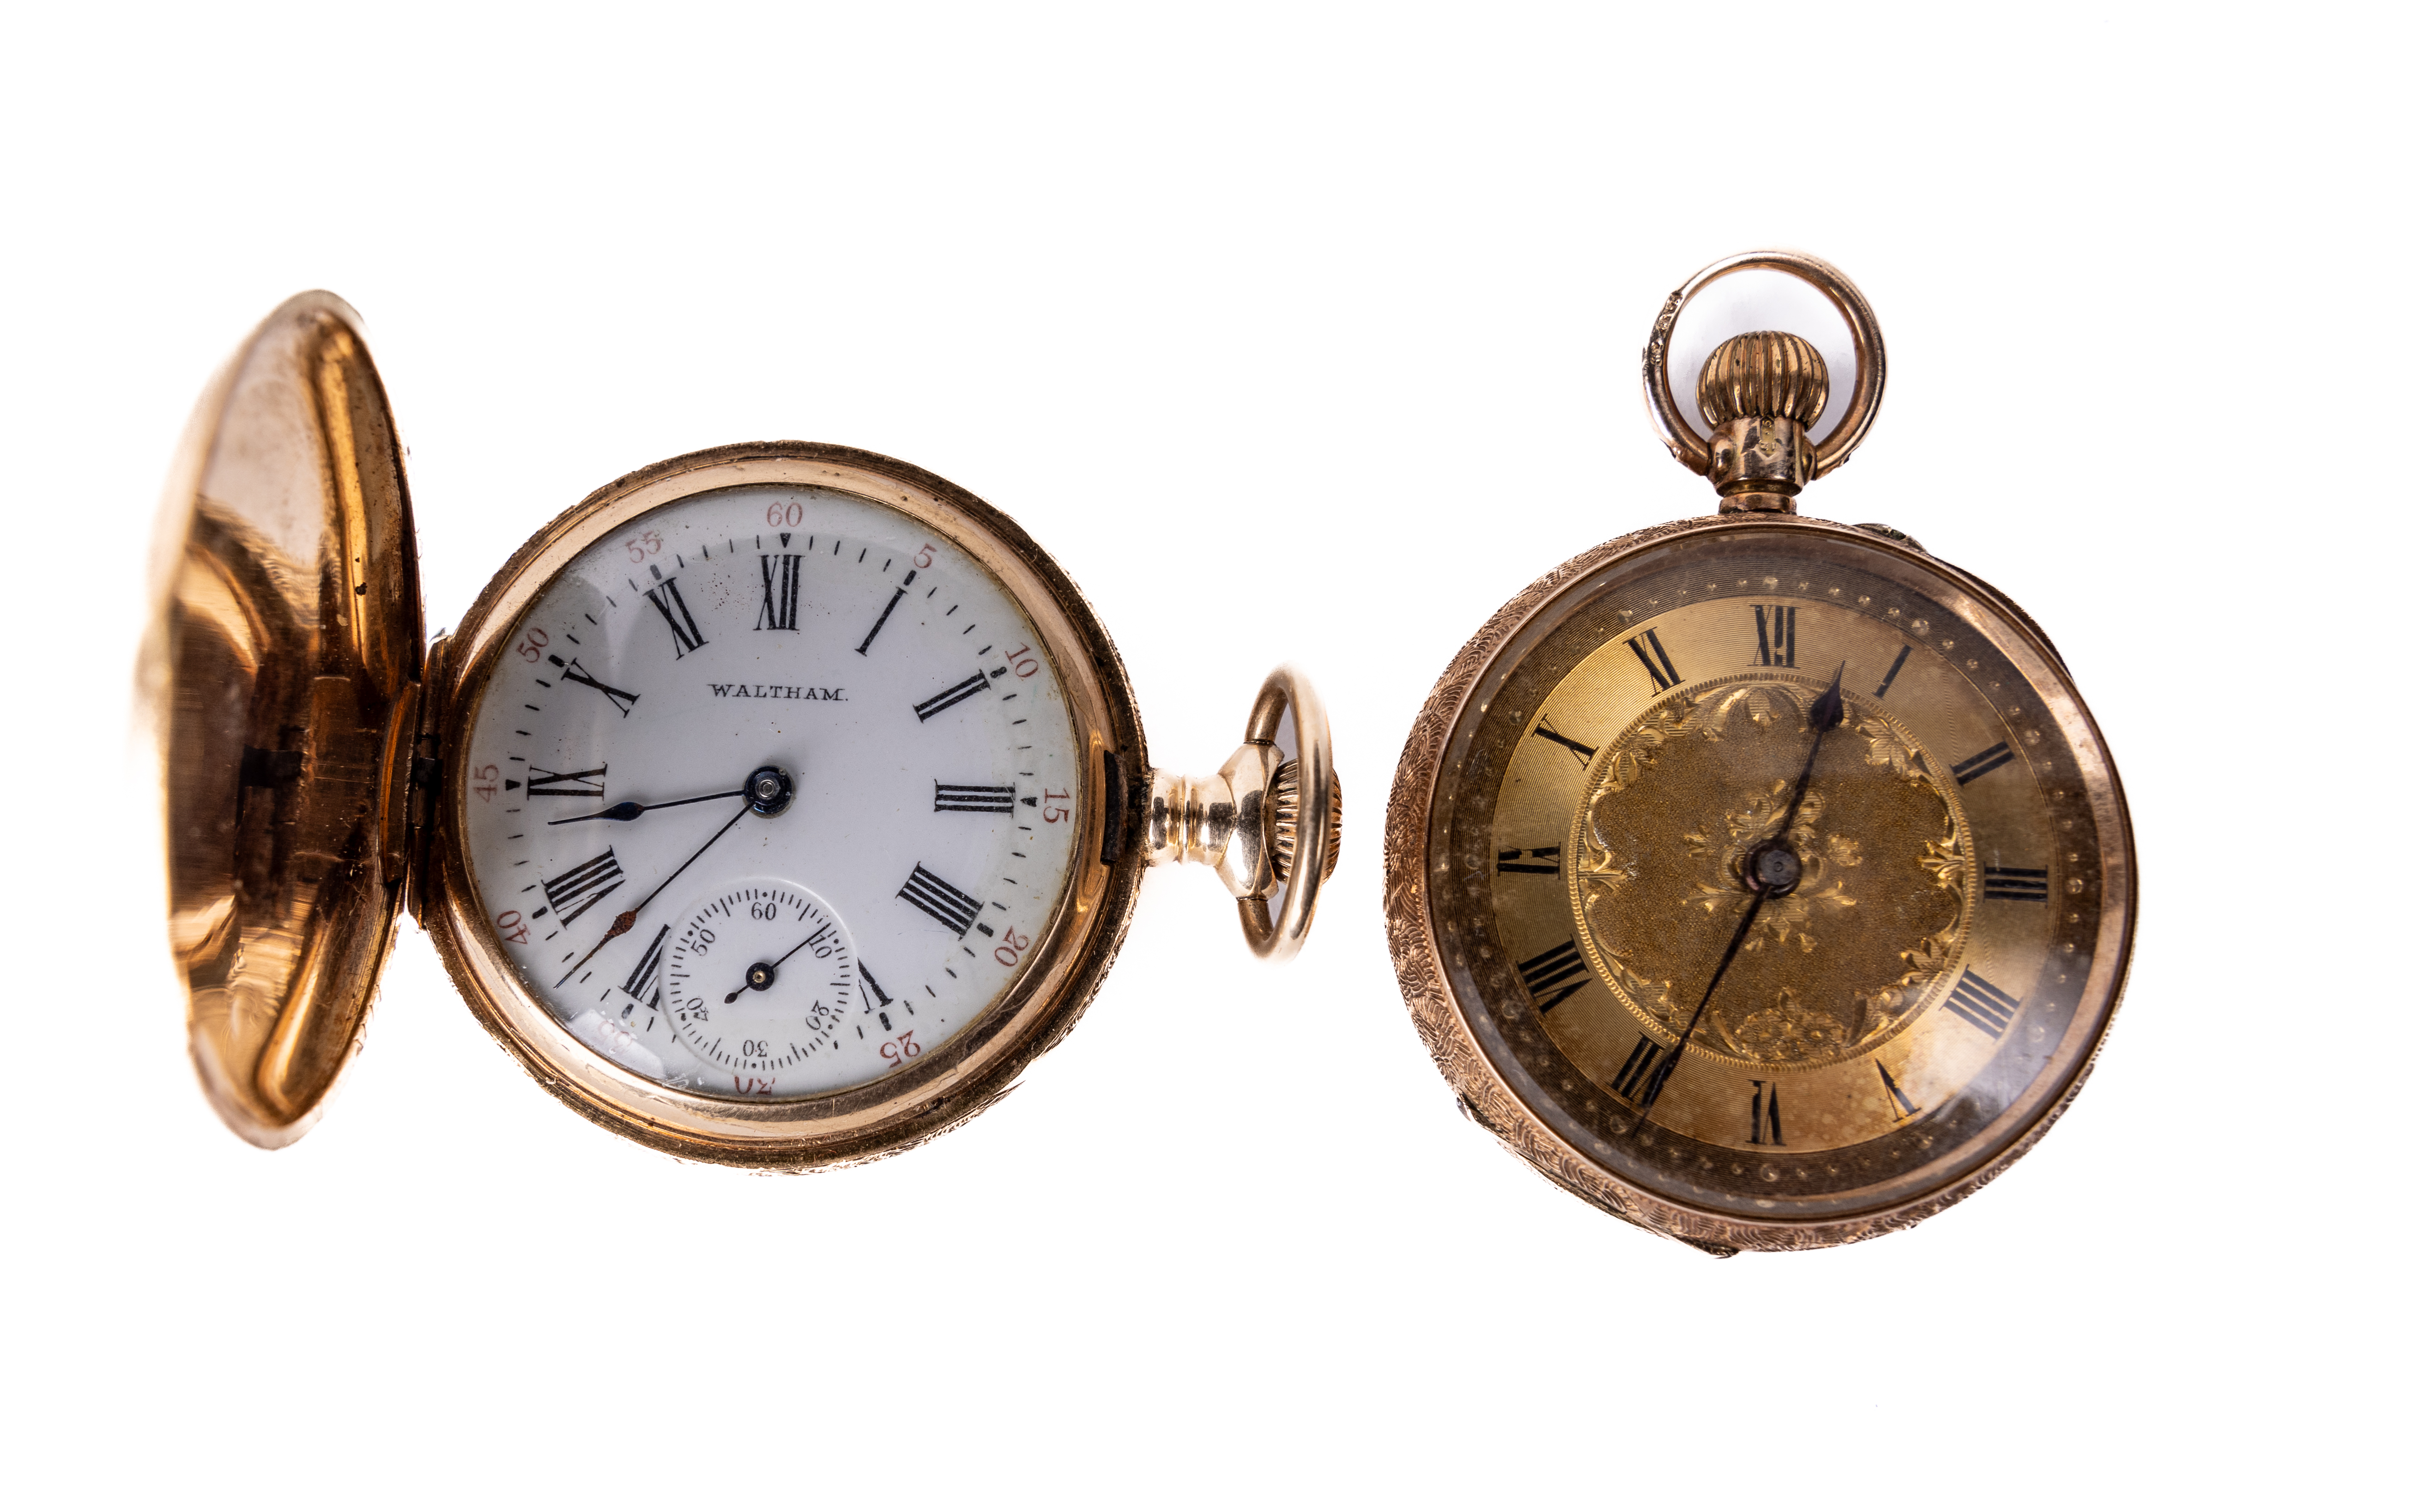 An American 14ct gold cased and engraved small Pocket Watch, by American Waltham Watch Co., with